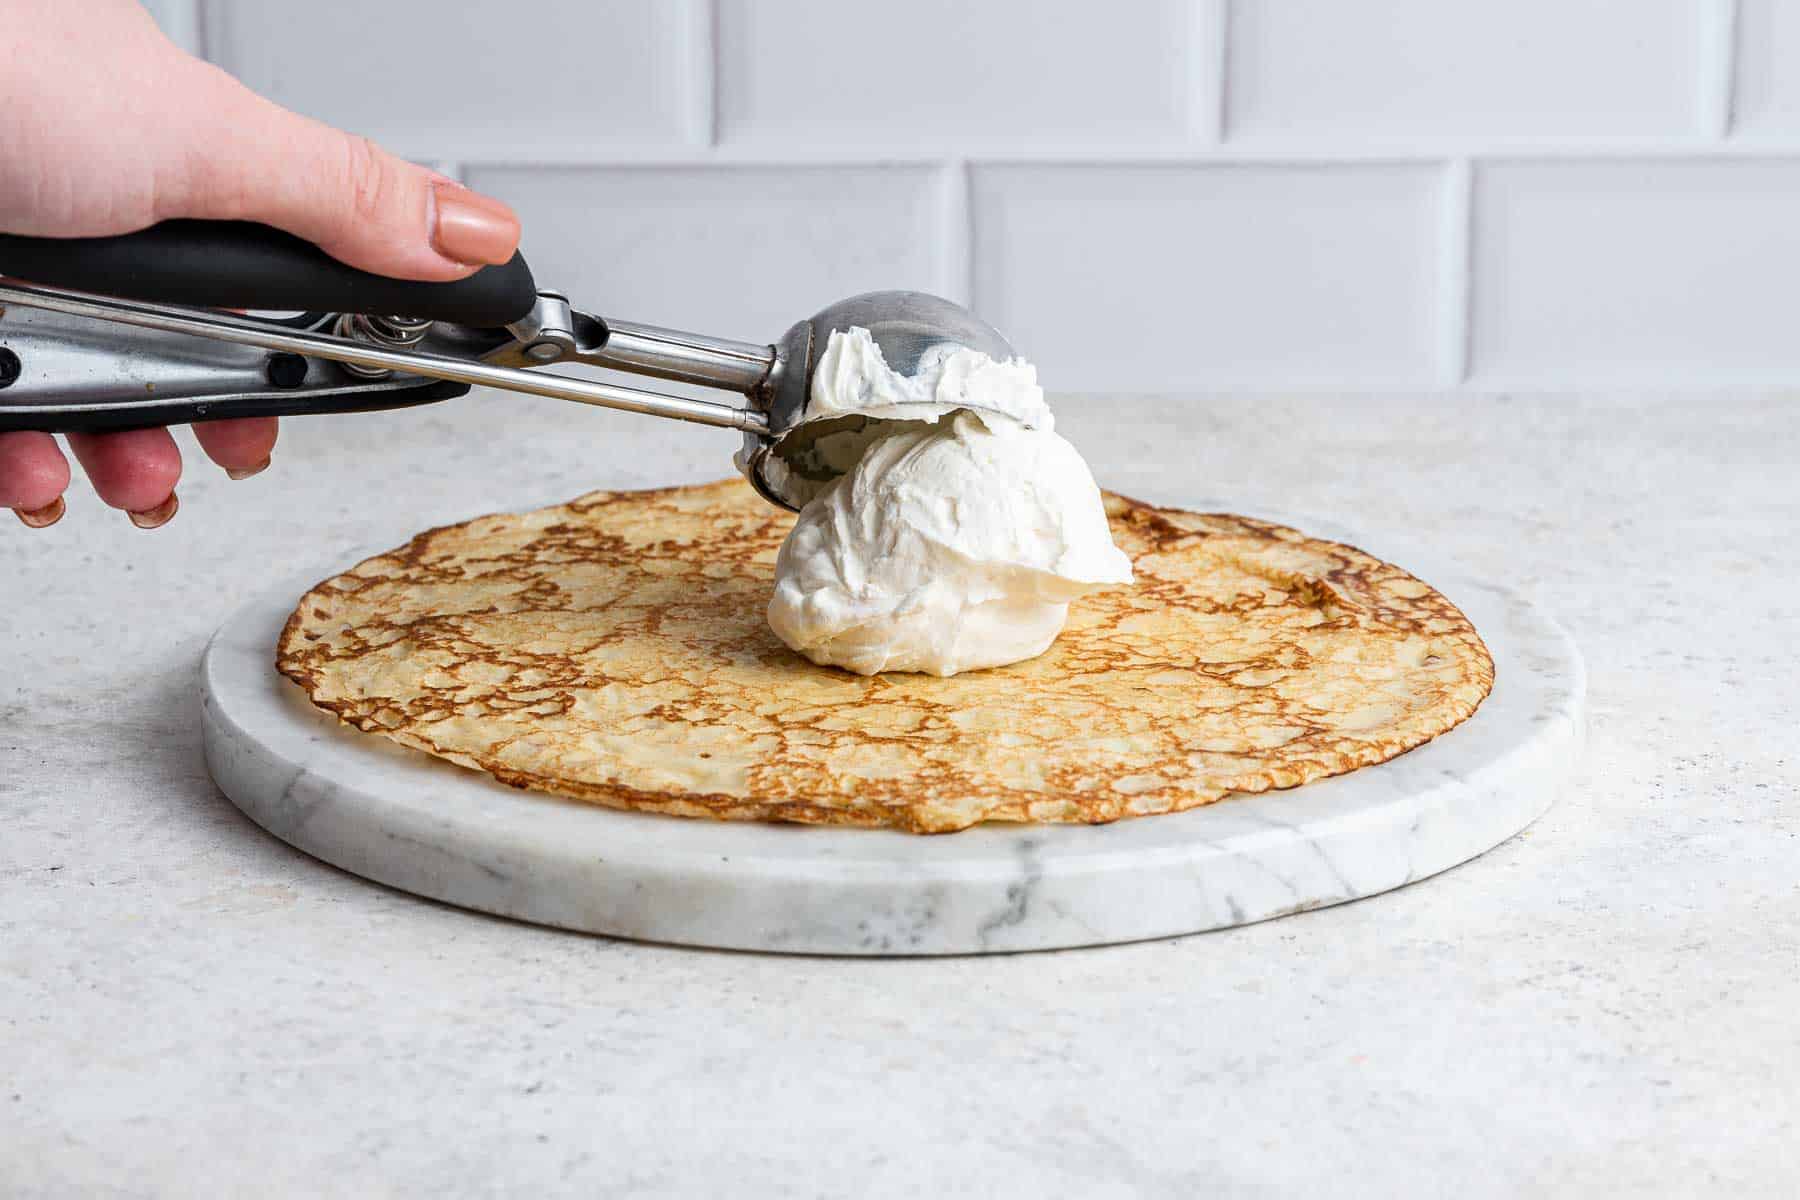 Placing mascarpone filling between layers of a crepe cake with ice cream scoop.